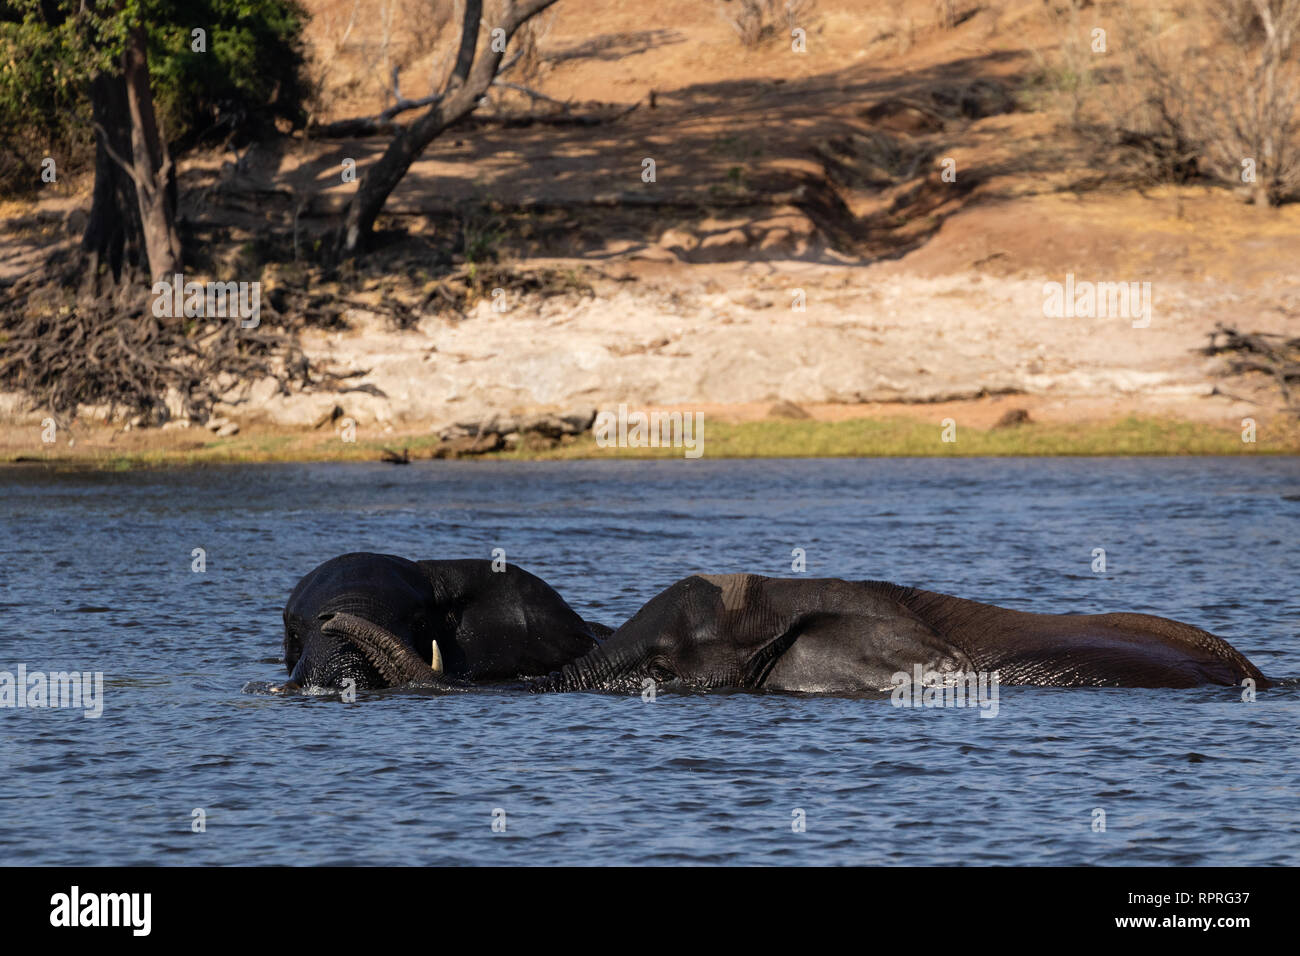 Two young male elephants play fighting and swimming in the river, Chobe National Park, Kasane in Botswana Stock Photo